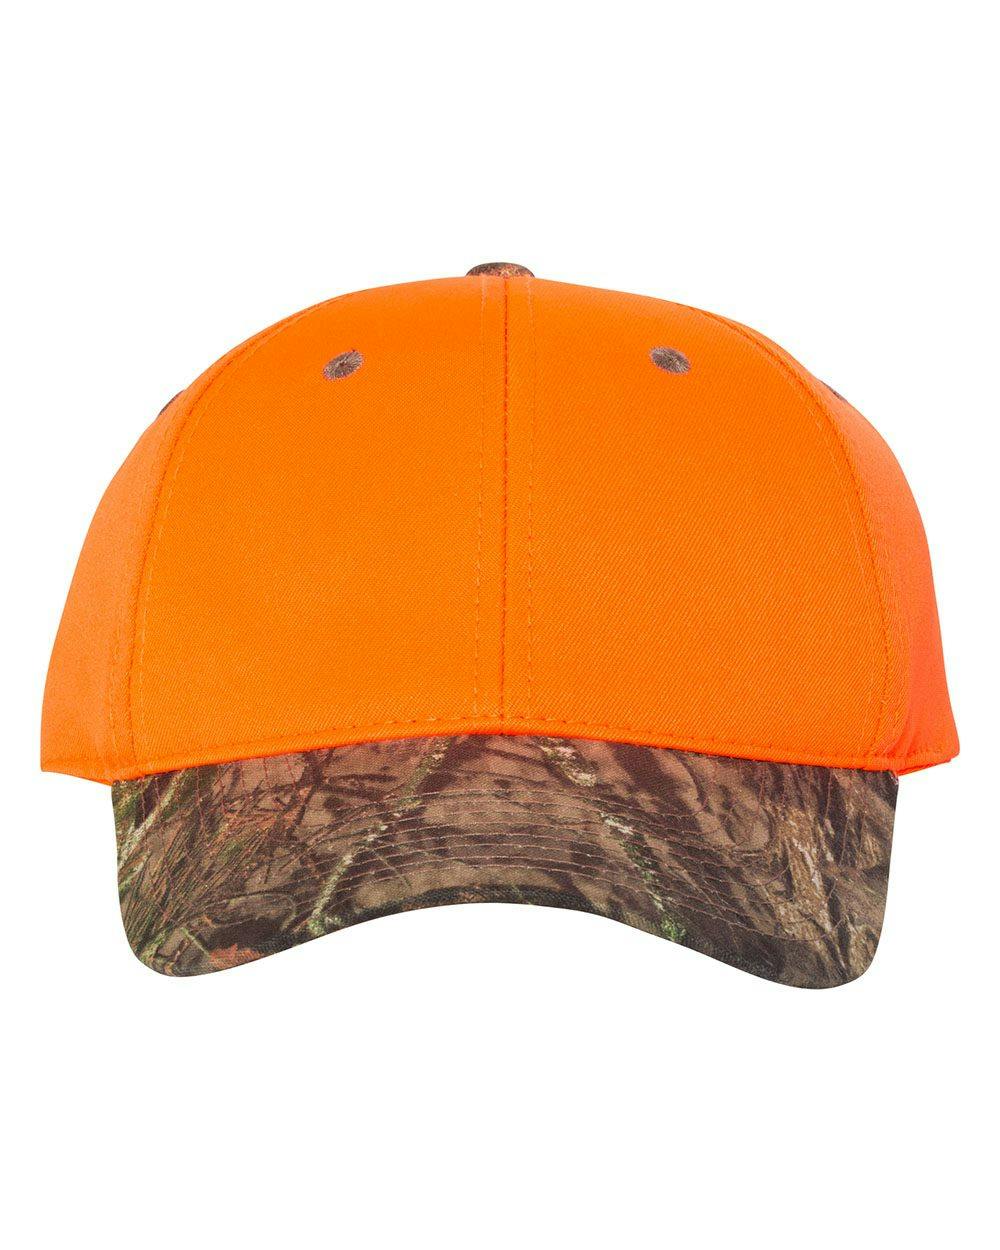 Image for Blaze Crown with Camo Visor Cap - 202IS